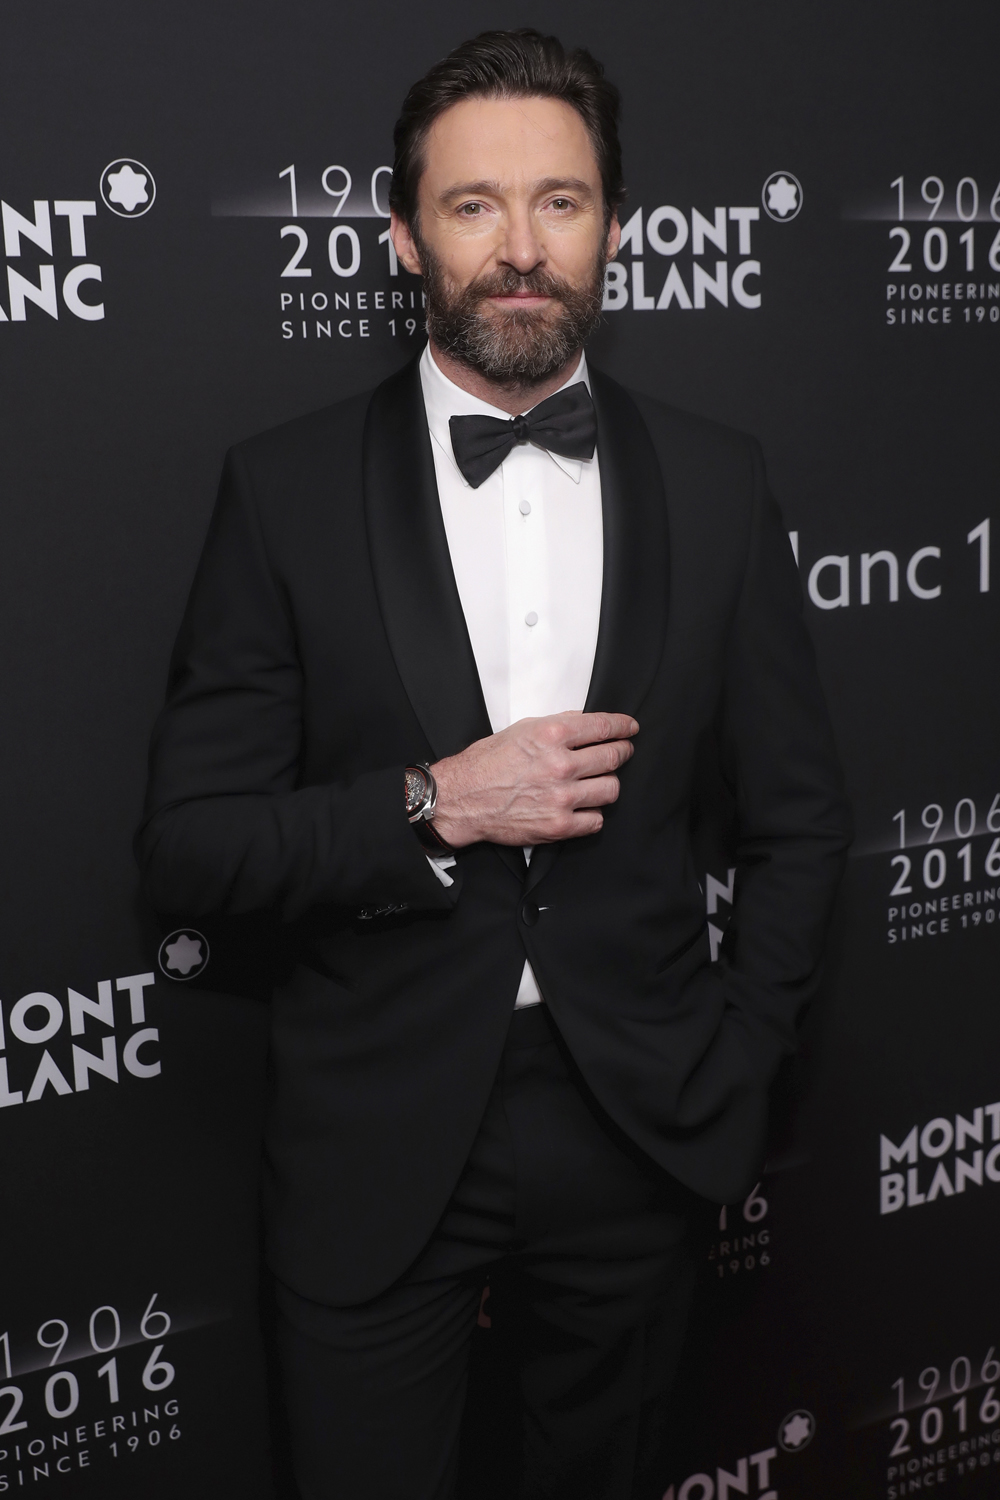 Montblanc 100th anniversiary gala. Australian actor Hugh Jackman looked daper in a black tux at the event.